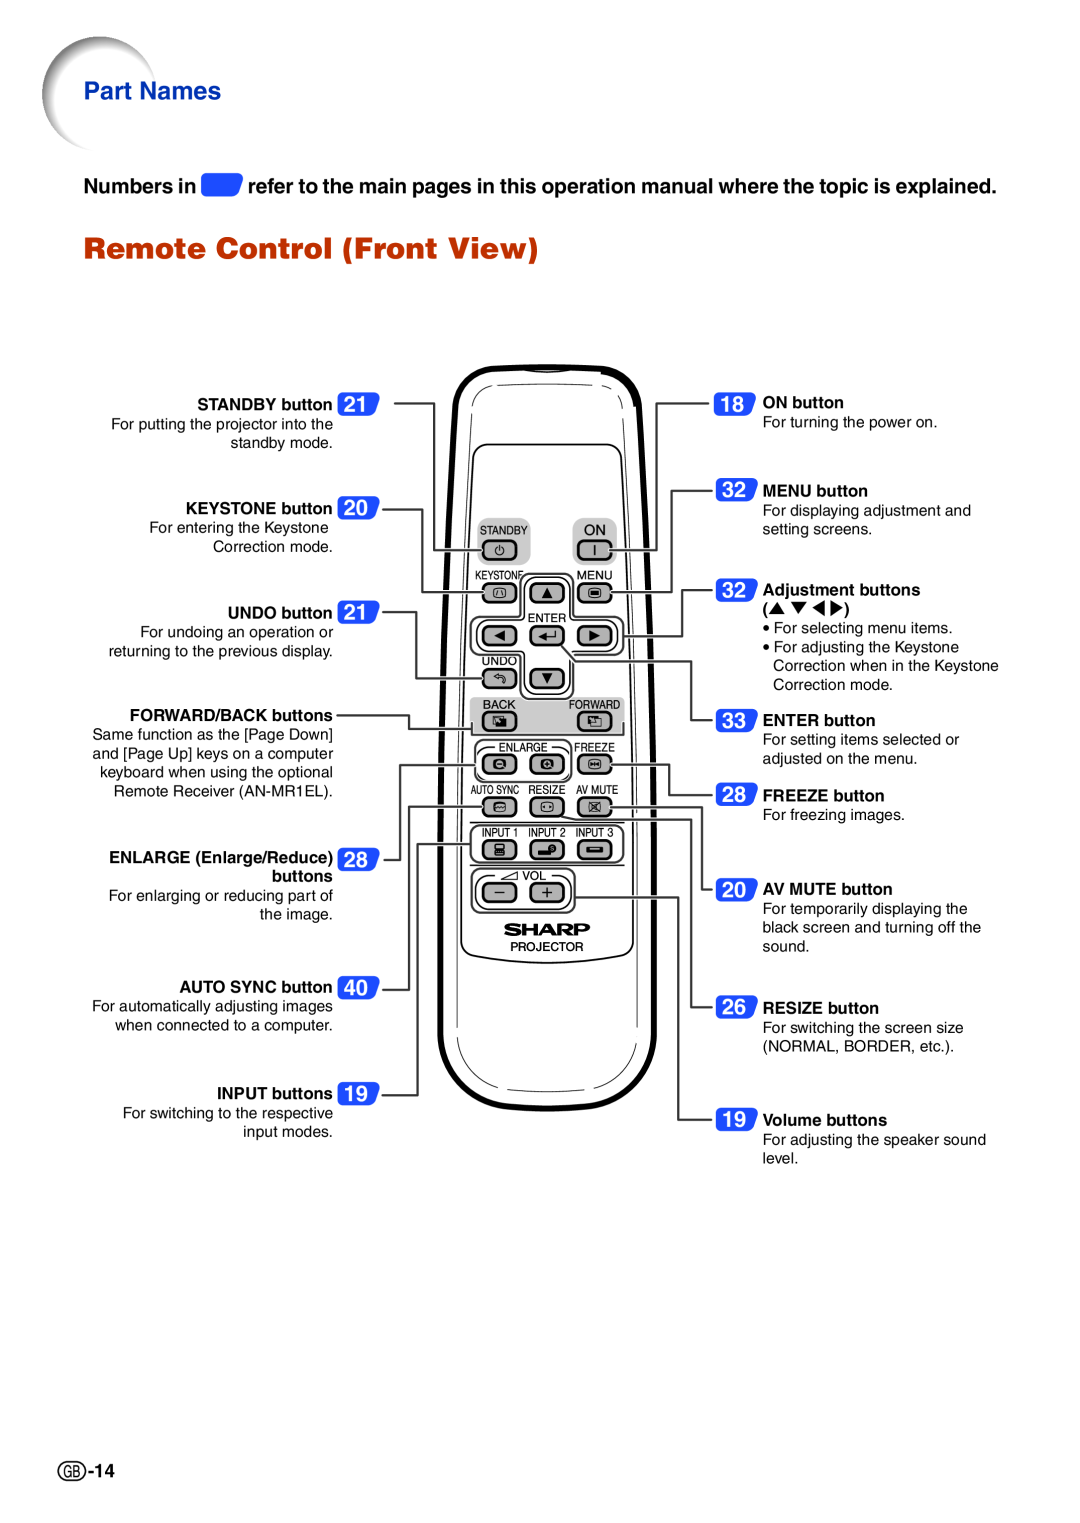 Sharp PG-B10S operation manual Remote Control Front View, Part Names 